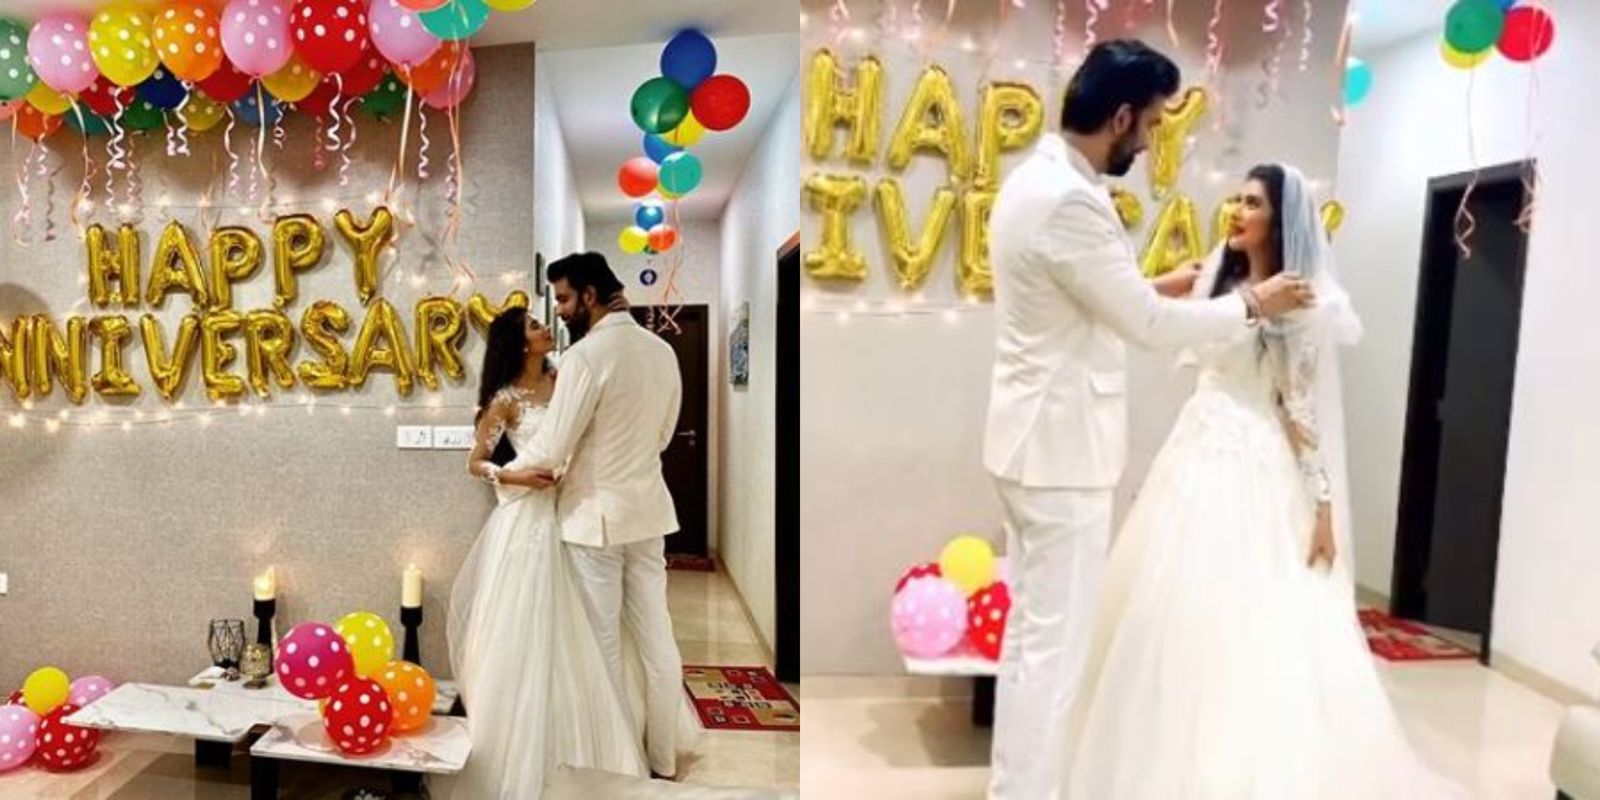 Rajeev Sen And Charu Asopa Celebrate Their Anniversary Over Three Months Late, Dress In Wedding Attires At Home; See Here  